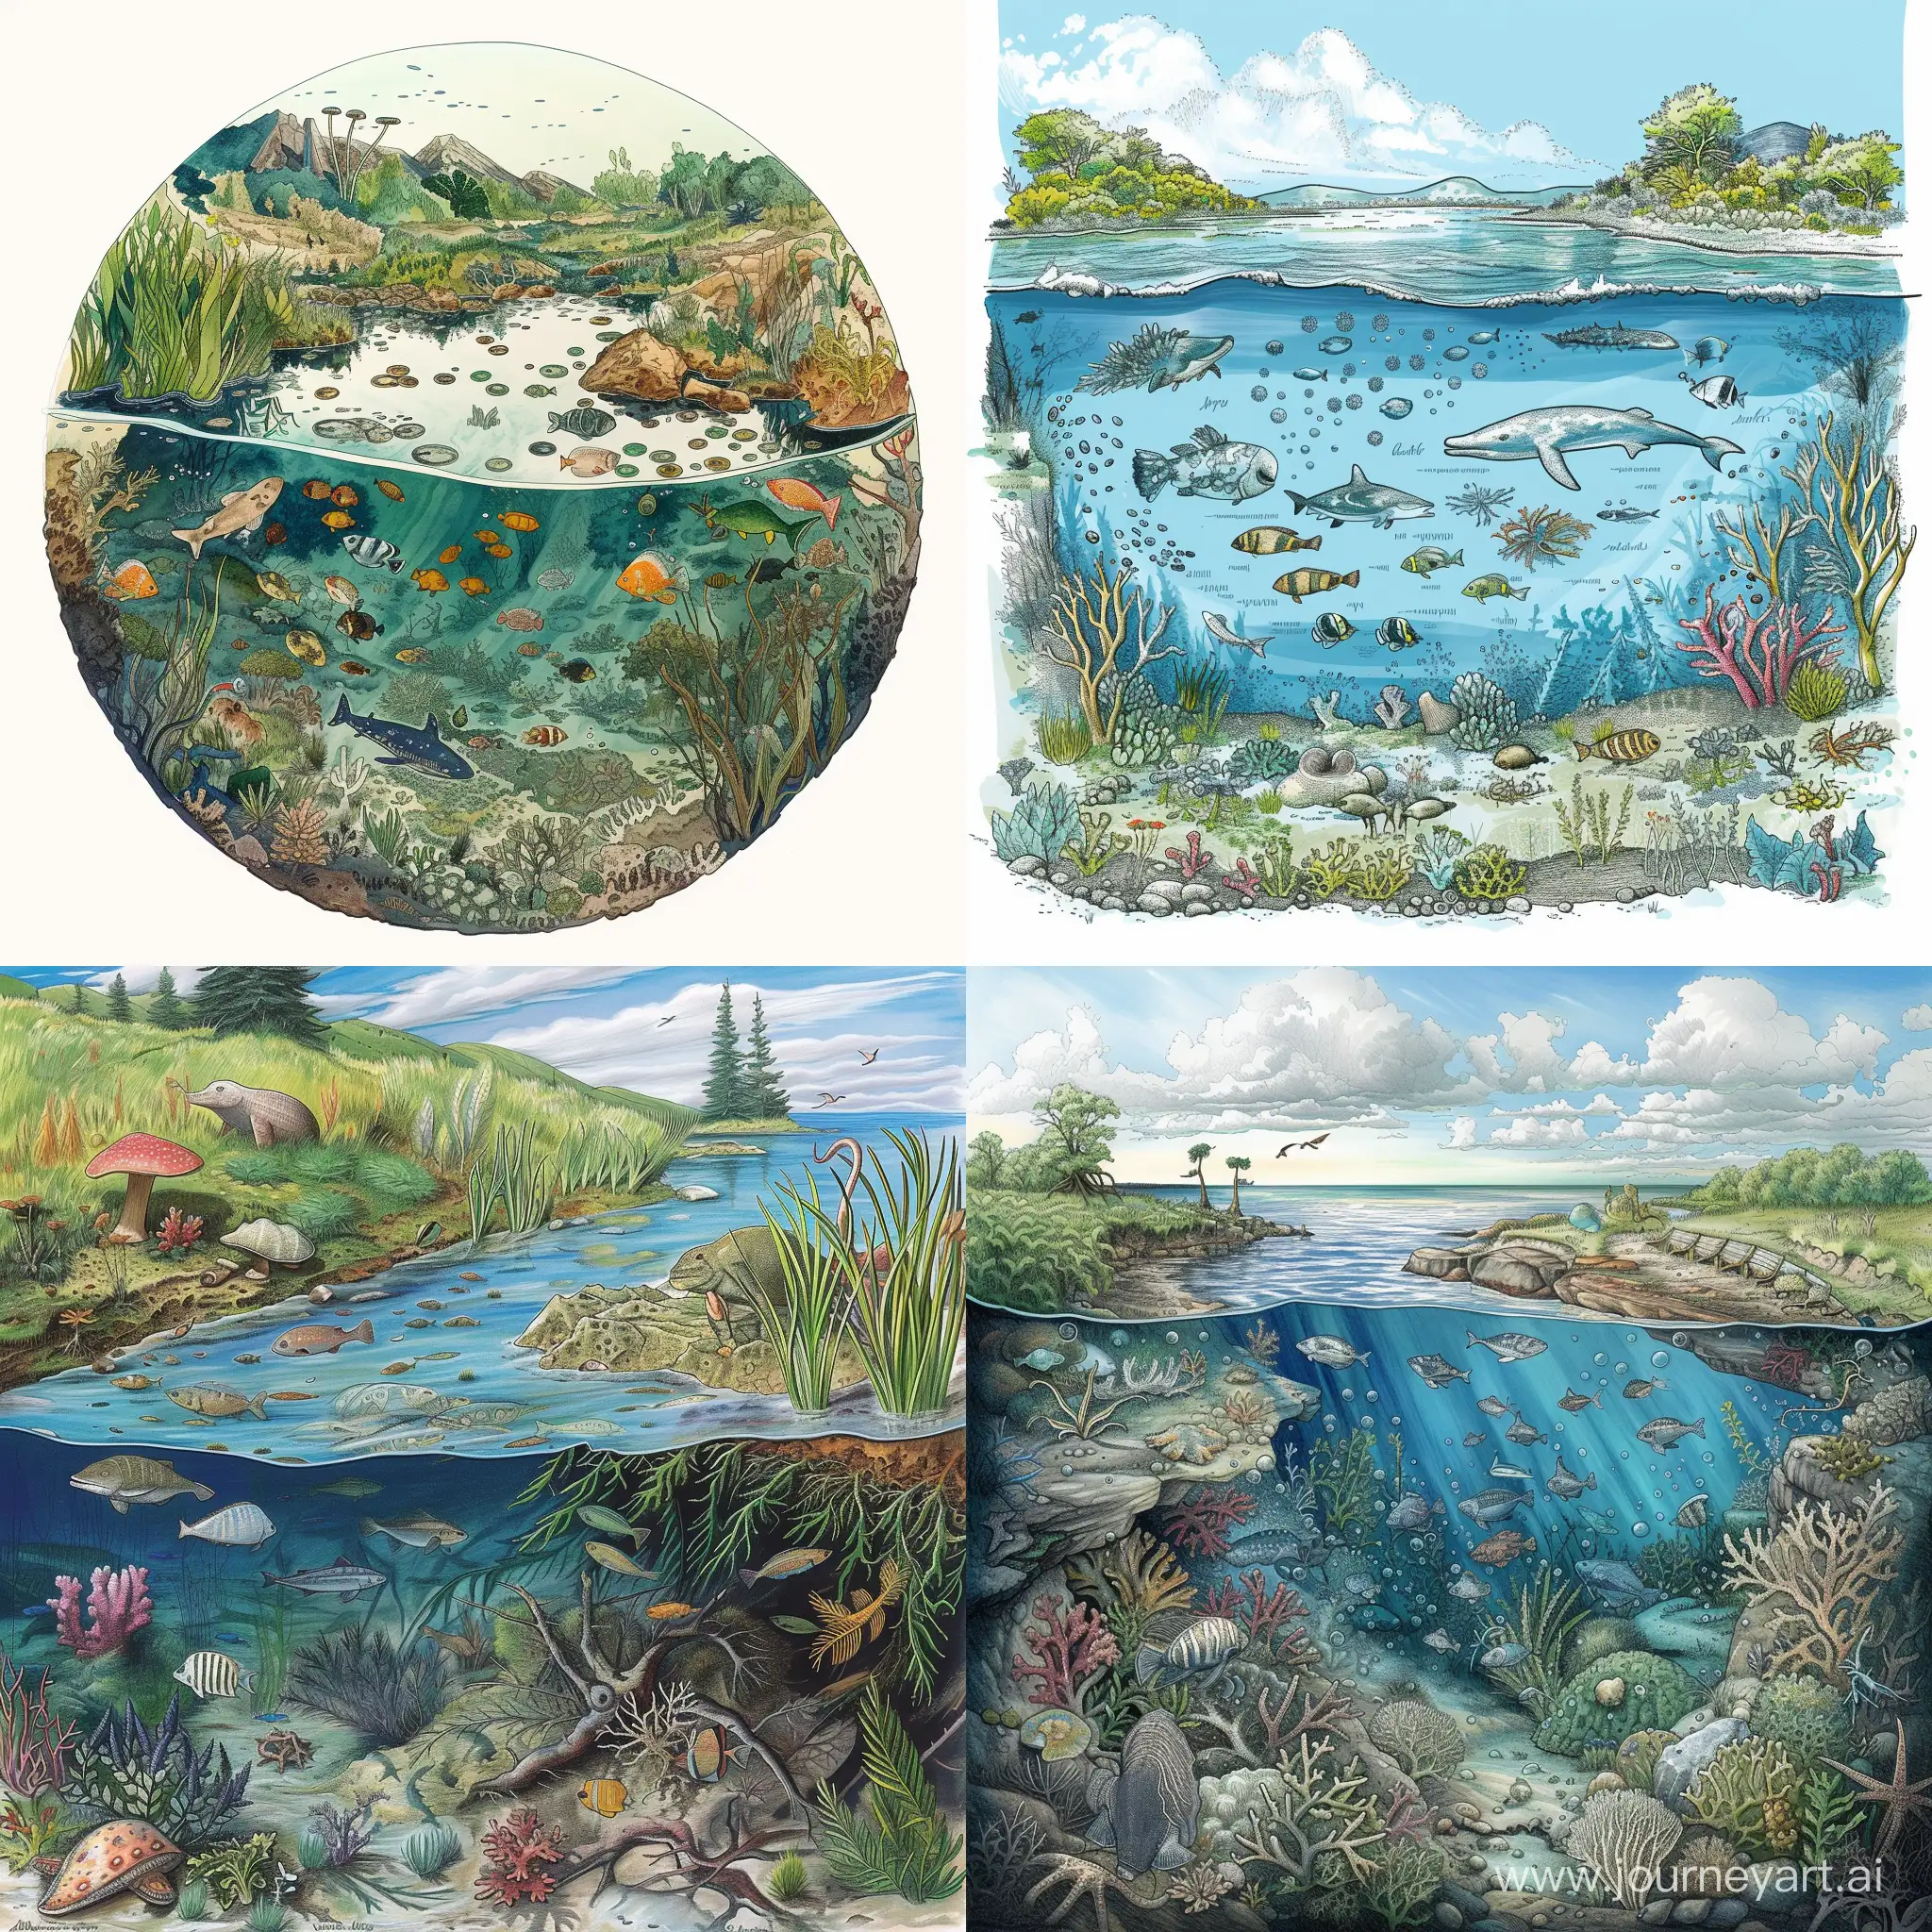 Aquatic-Ecosystems-Vibrant-Depictions-of-Water-Worlds